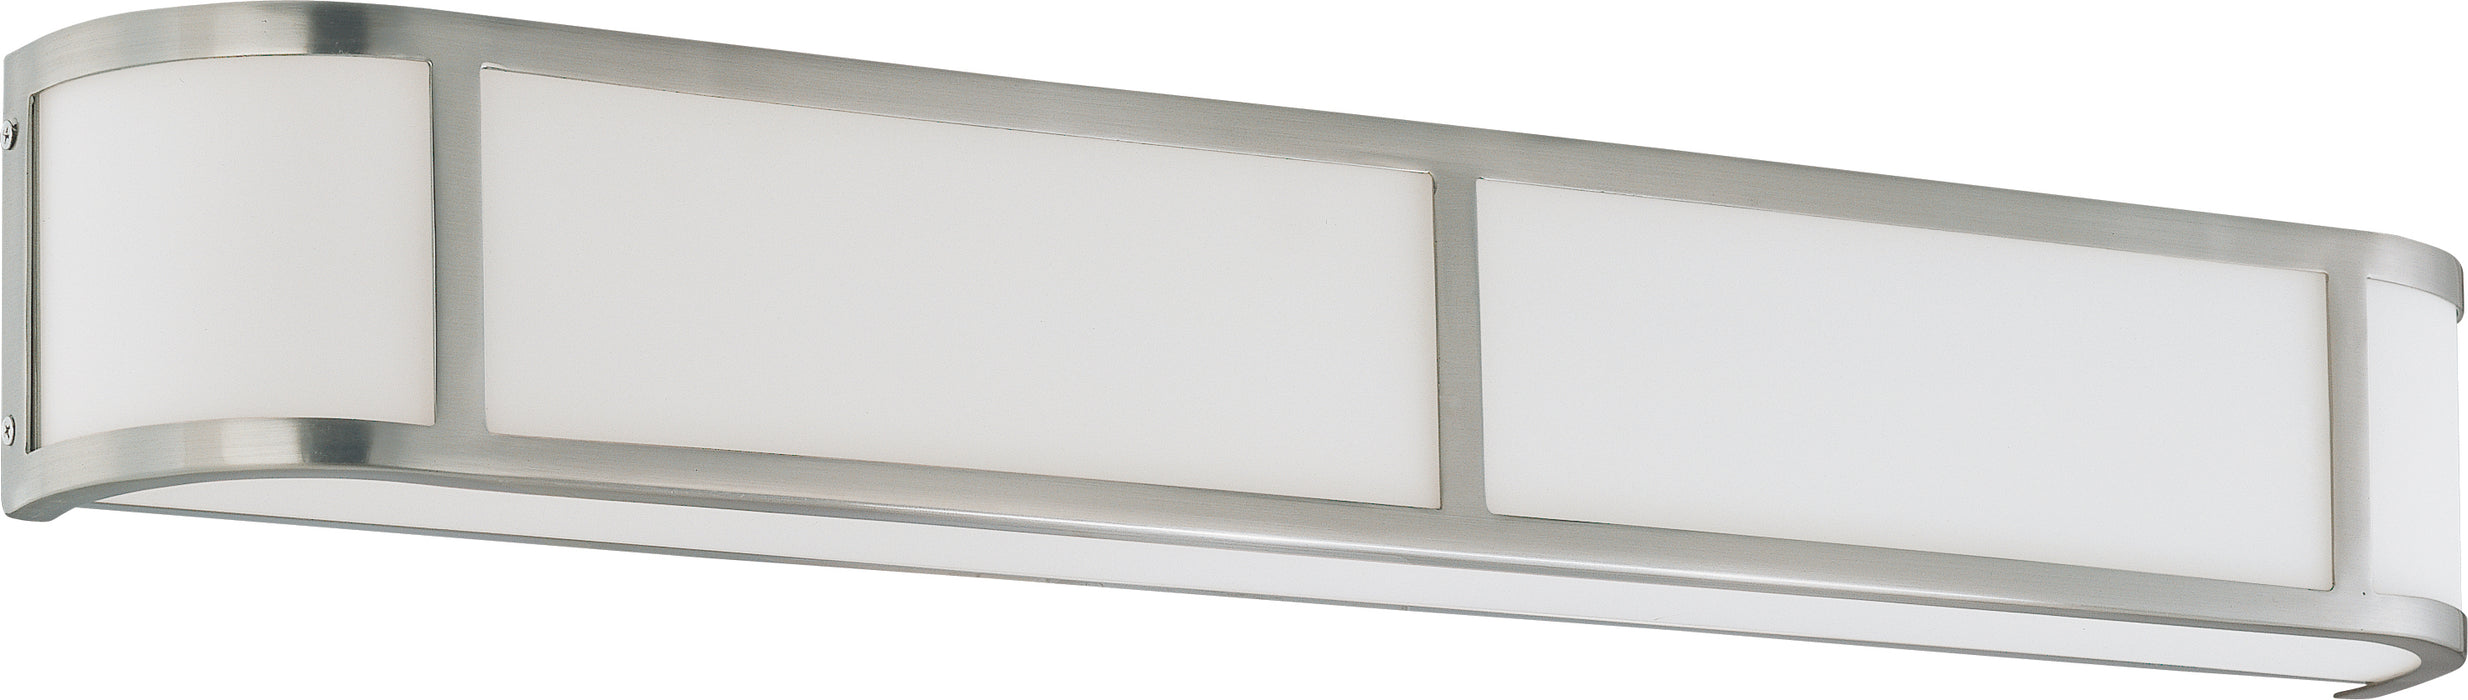 SATCO/NUVO Odeon 4-Light Wall Sconce With Satin White Glass (60-2875)